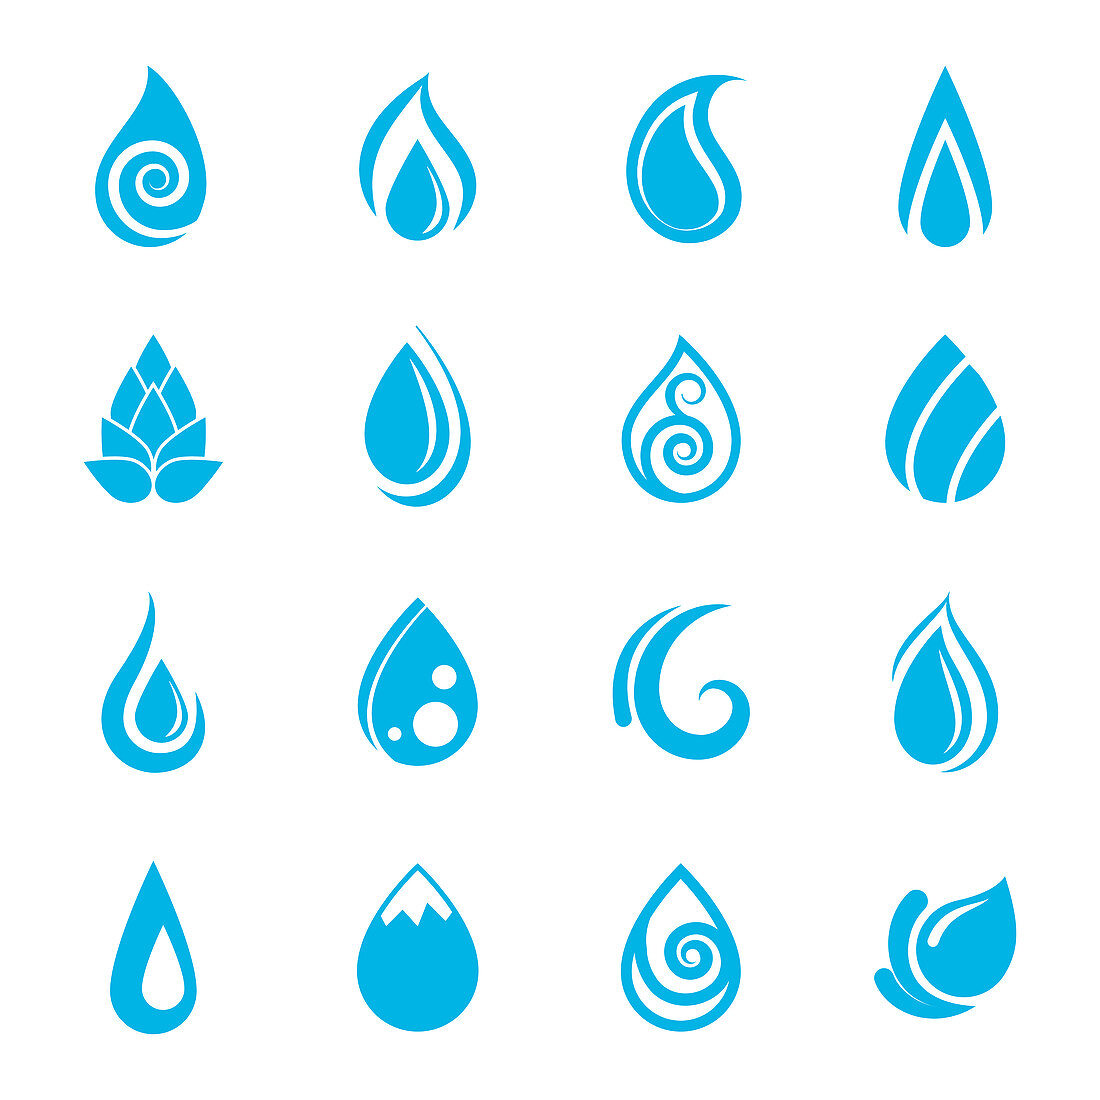 Water drop icons, illustration